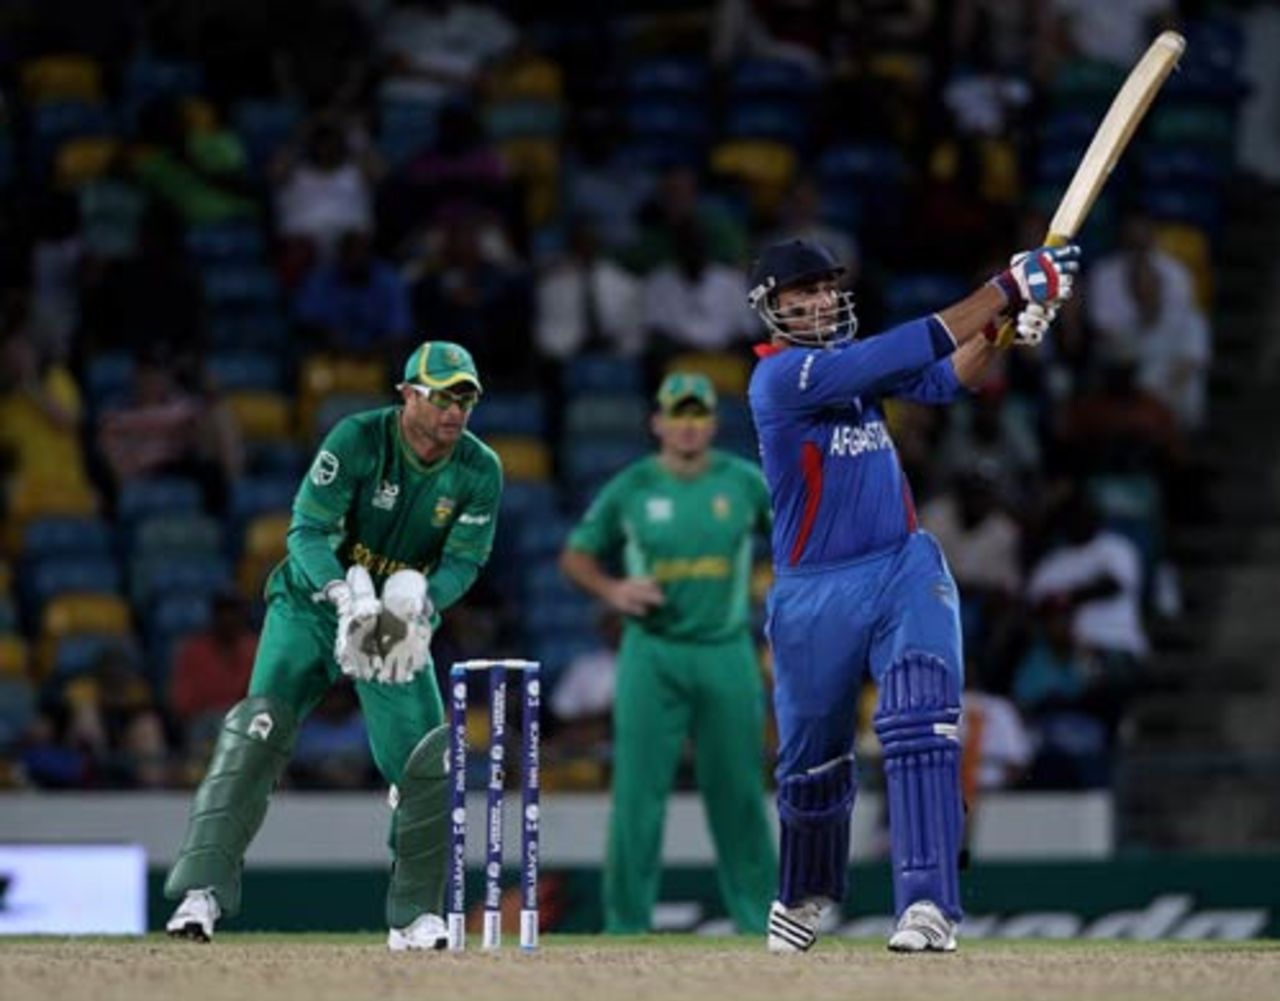 Hamid Hassan smashes one down the ground, Afghanistan v South Africa, ICC World Twenty20, Bridgetown, May 5, 2010